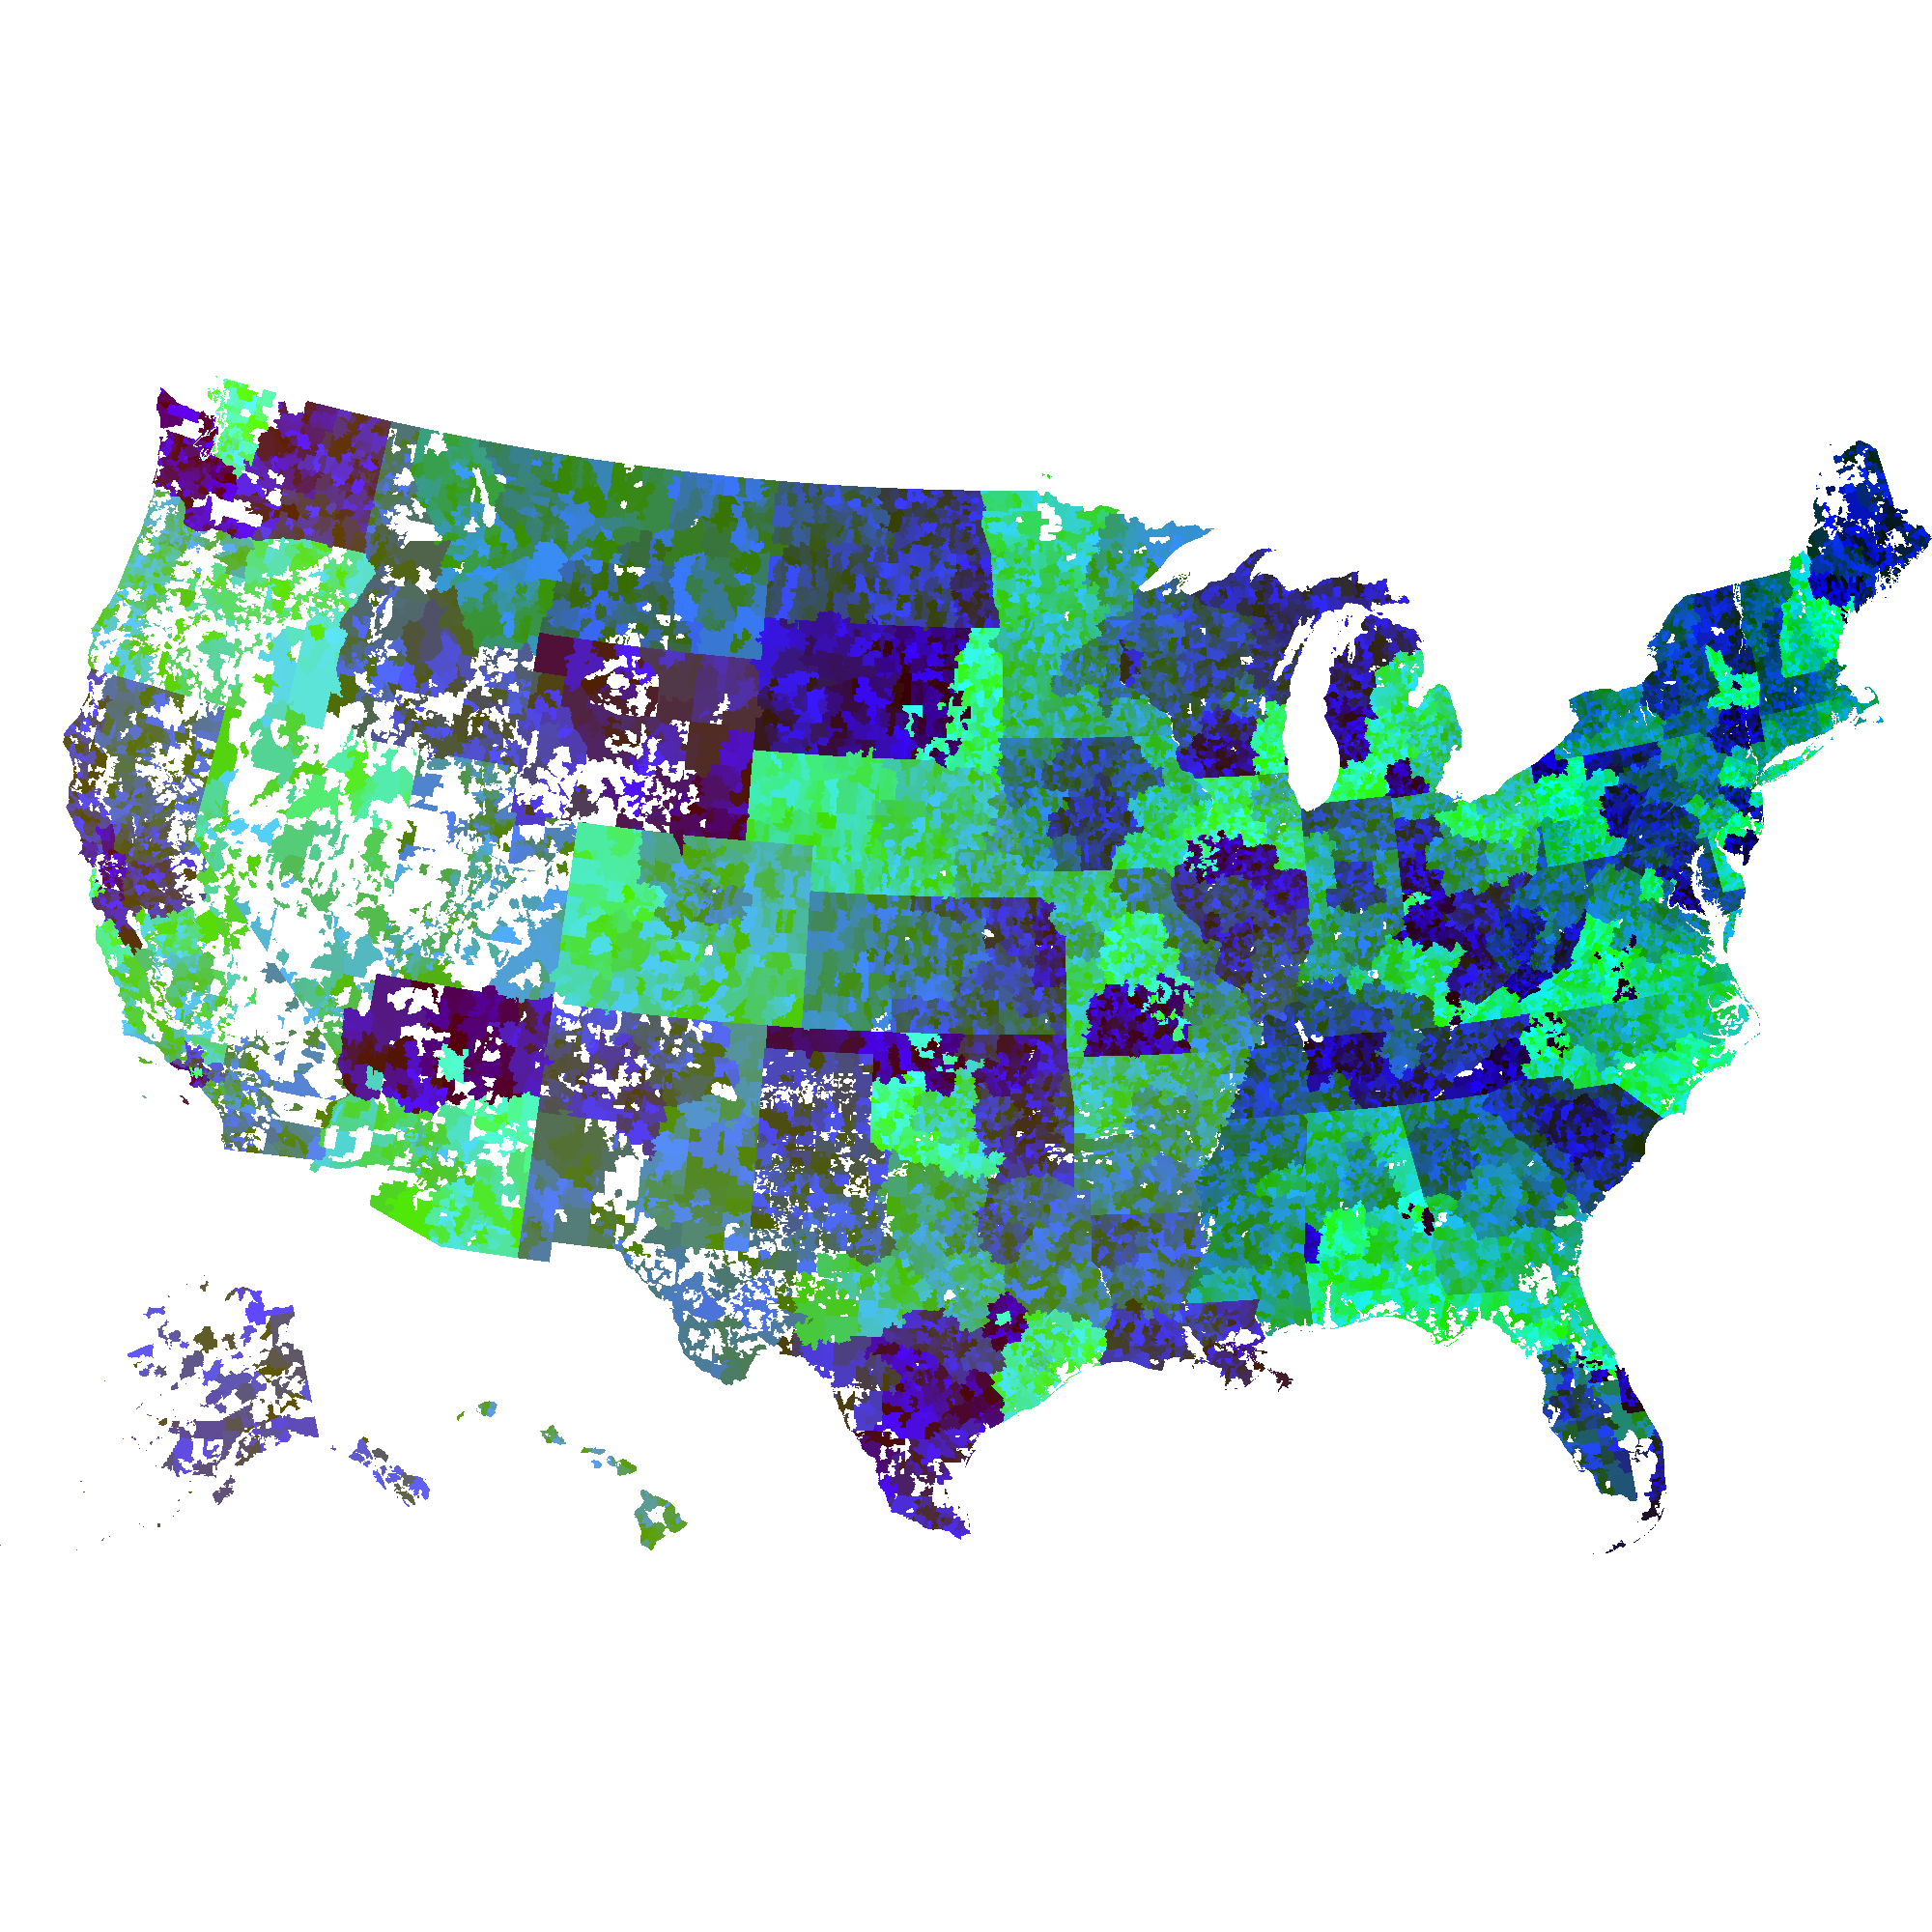 United States Maps with distinct colors for each zip code.